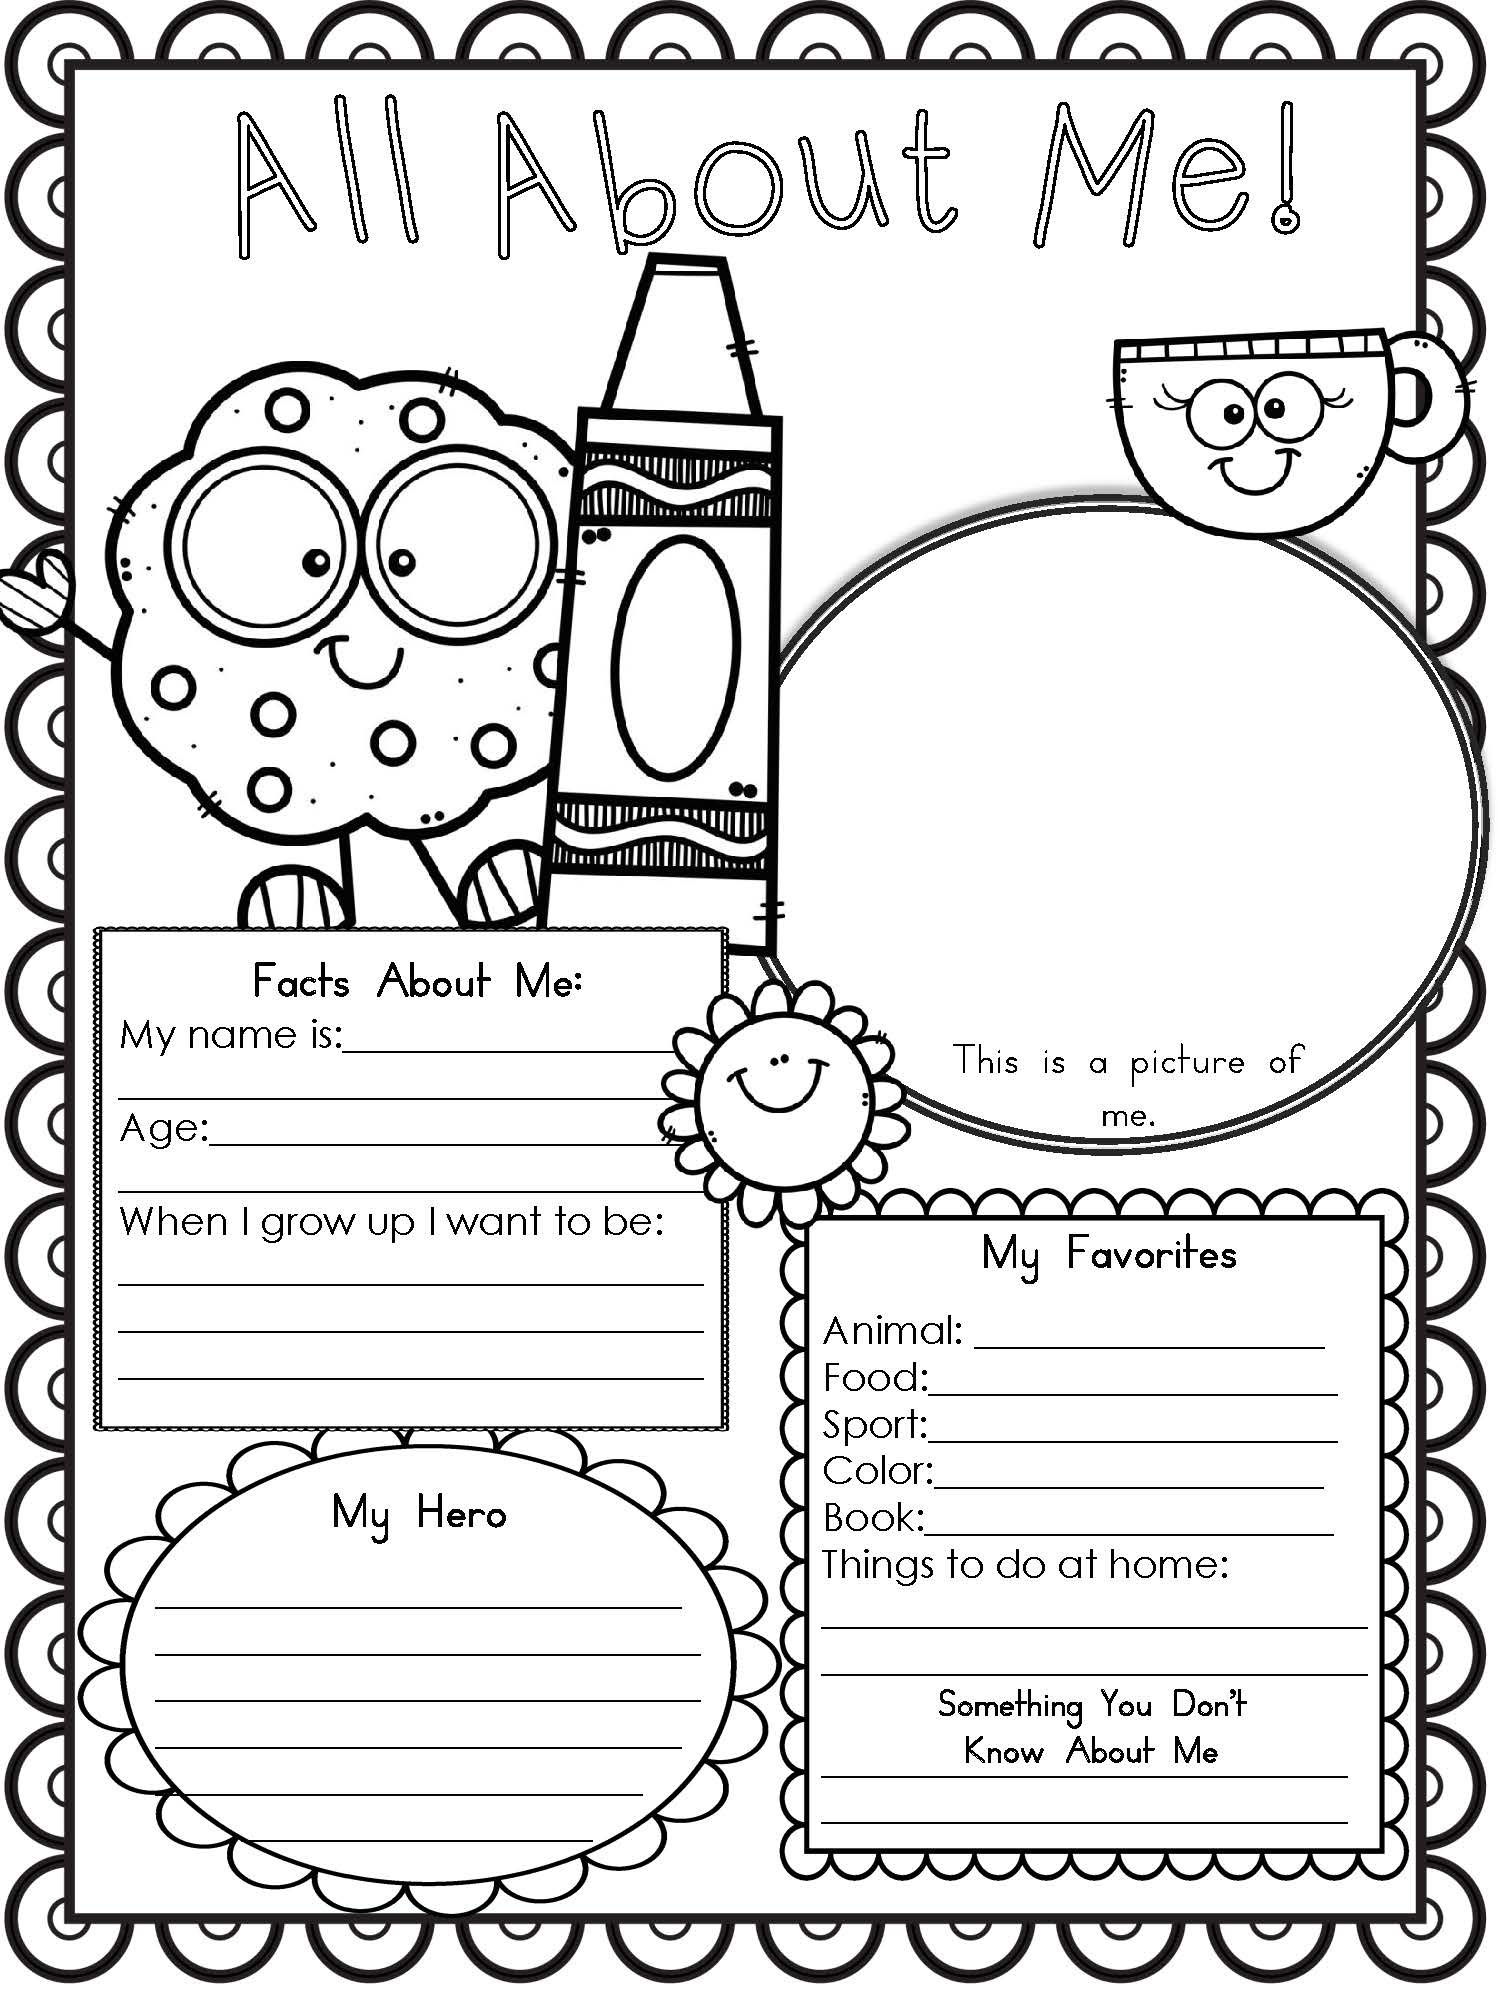 Free Printable All About Me Worksheet - Modern Homeschool Family - Free Printable All About Me Worksheet